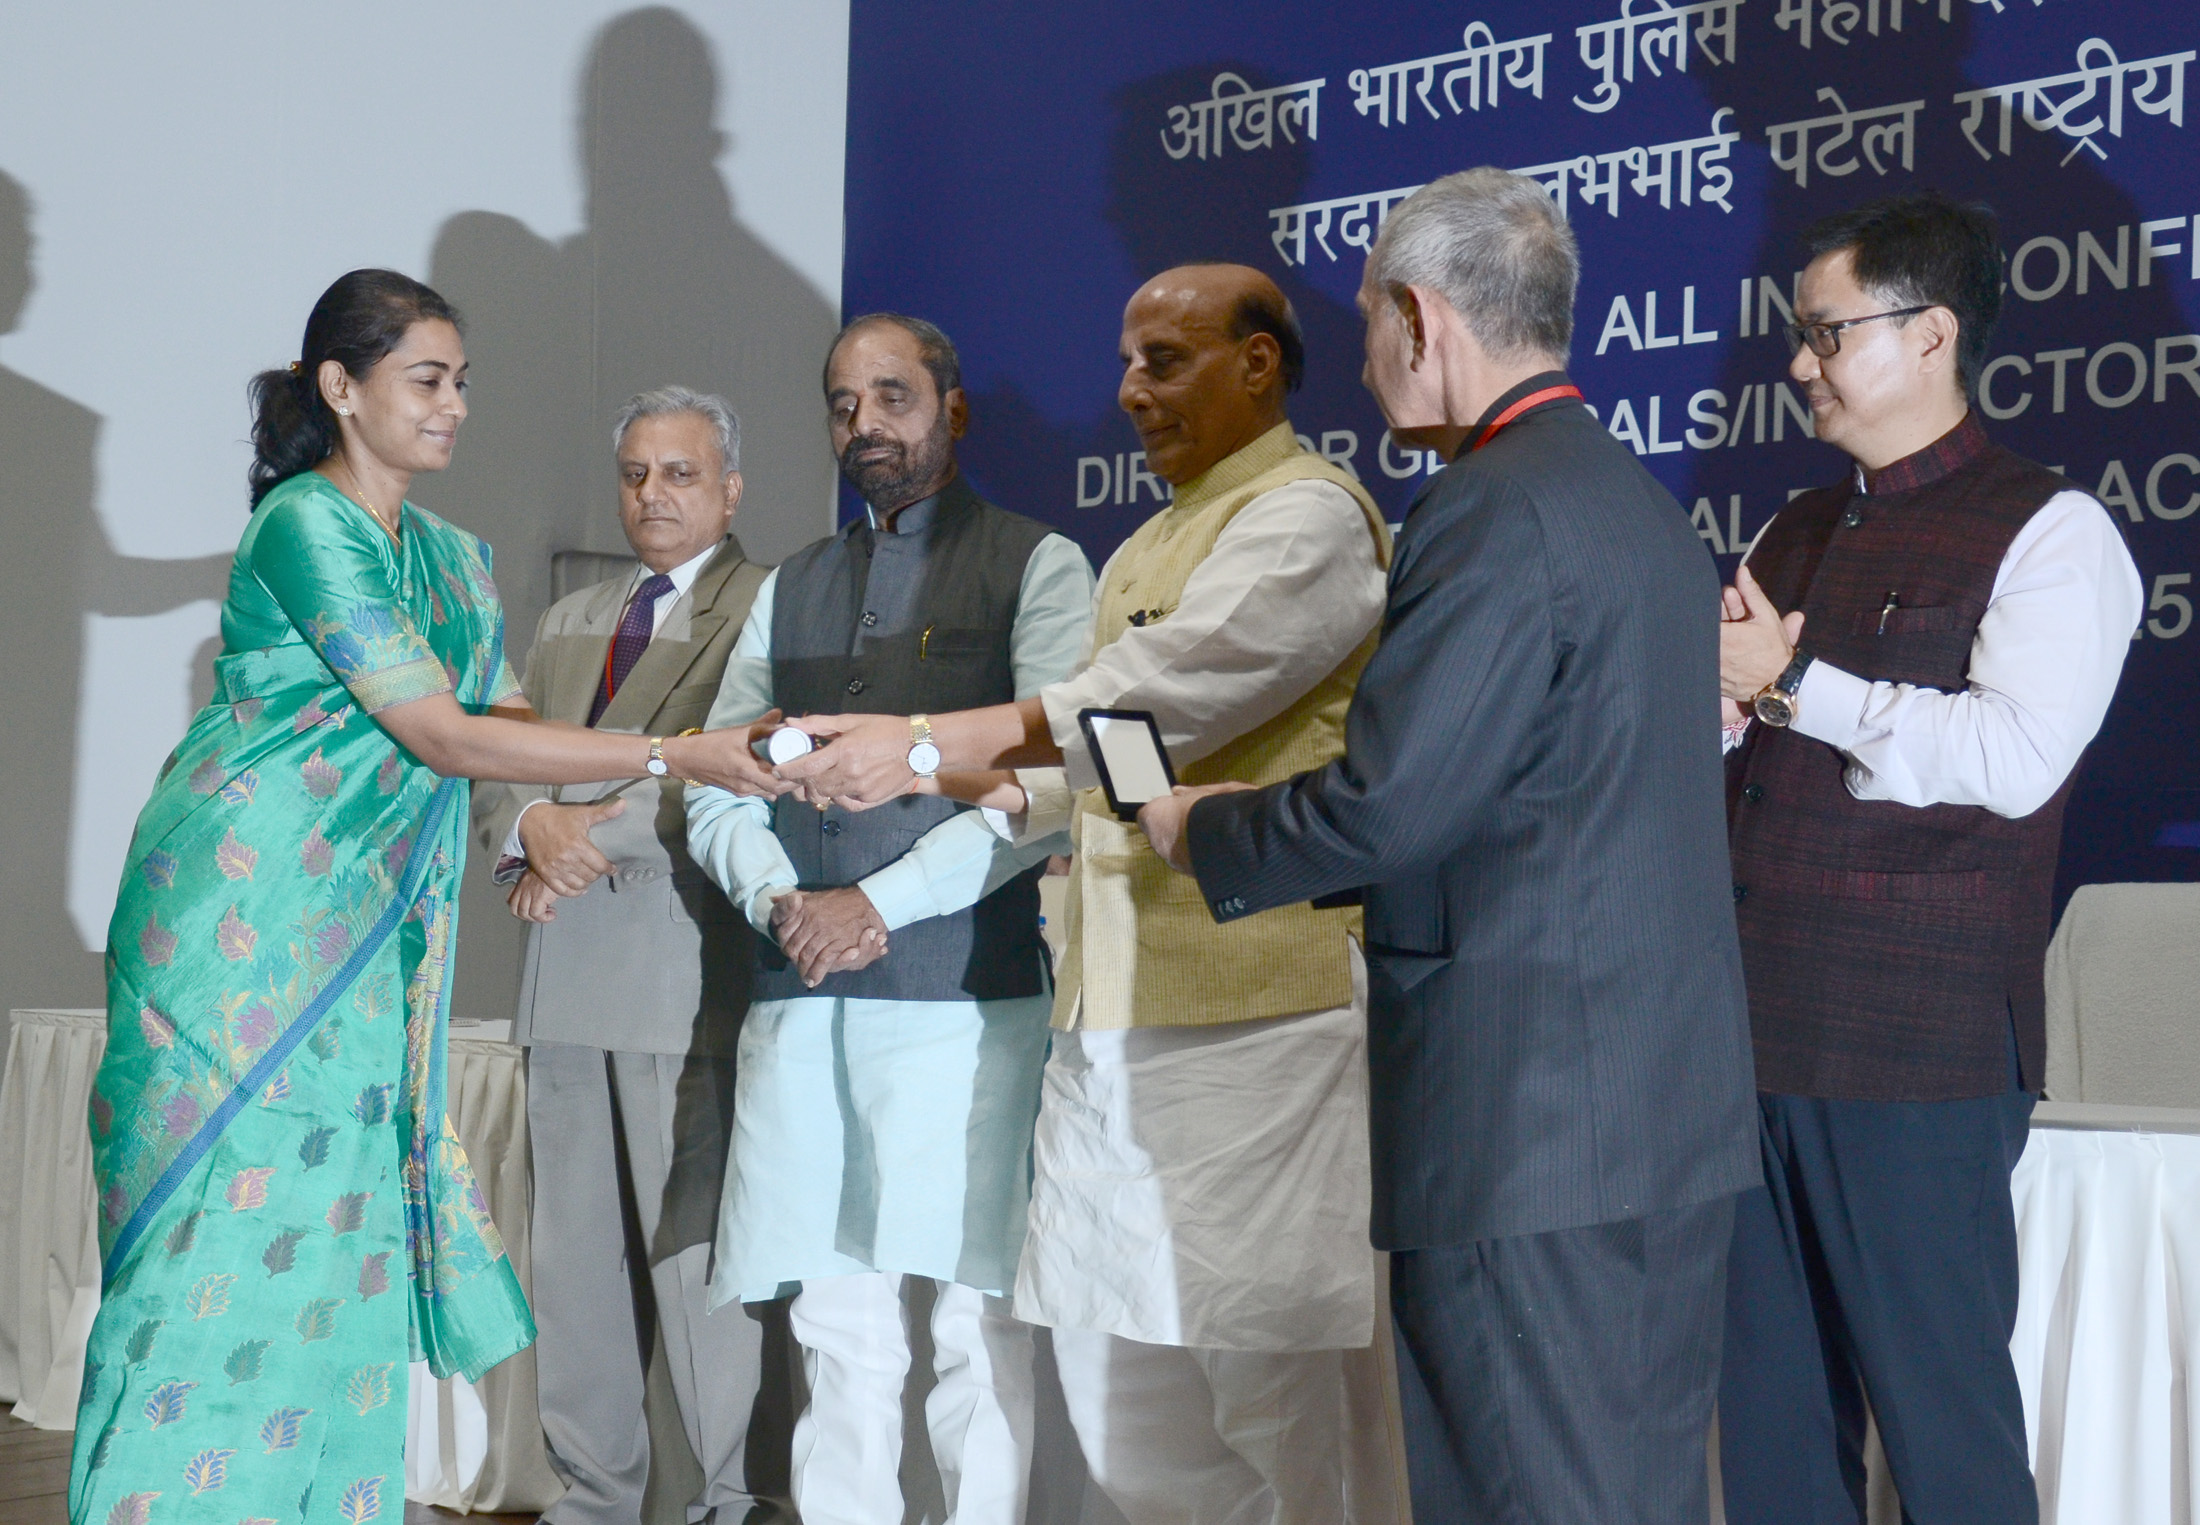 The Union Home Minister, Shri Rajnath Singh presenting the Police Medals for meritorious service to the officers of Intelligence Bureau (IB), at the inauguration of the All India Conference of DGPs/IGPs, 2016, at Sardar Vallabhbhai Patel National Police Academy, in Hyderabad on November 25, 2016. 	The Ministers of State for Home Affairs, Shri Hansraj Gangaram Ahir & Shri Kiren Rijiju and other dignitaries are also seen.